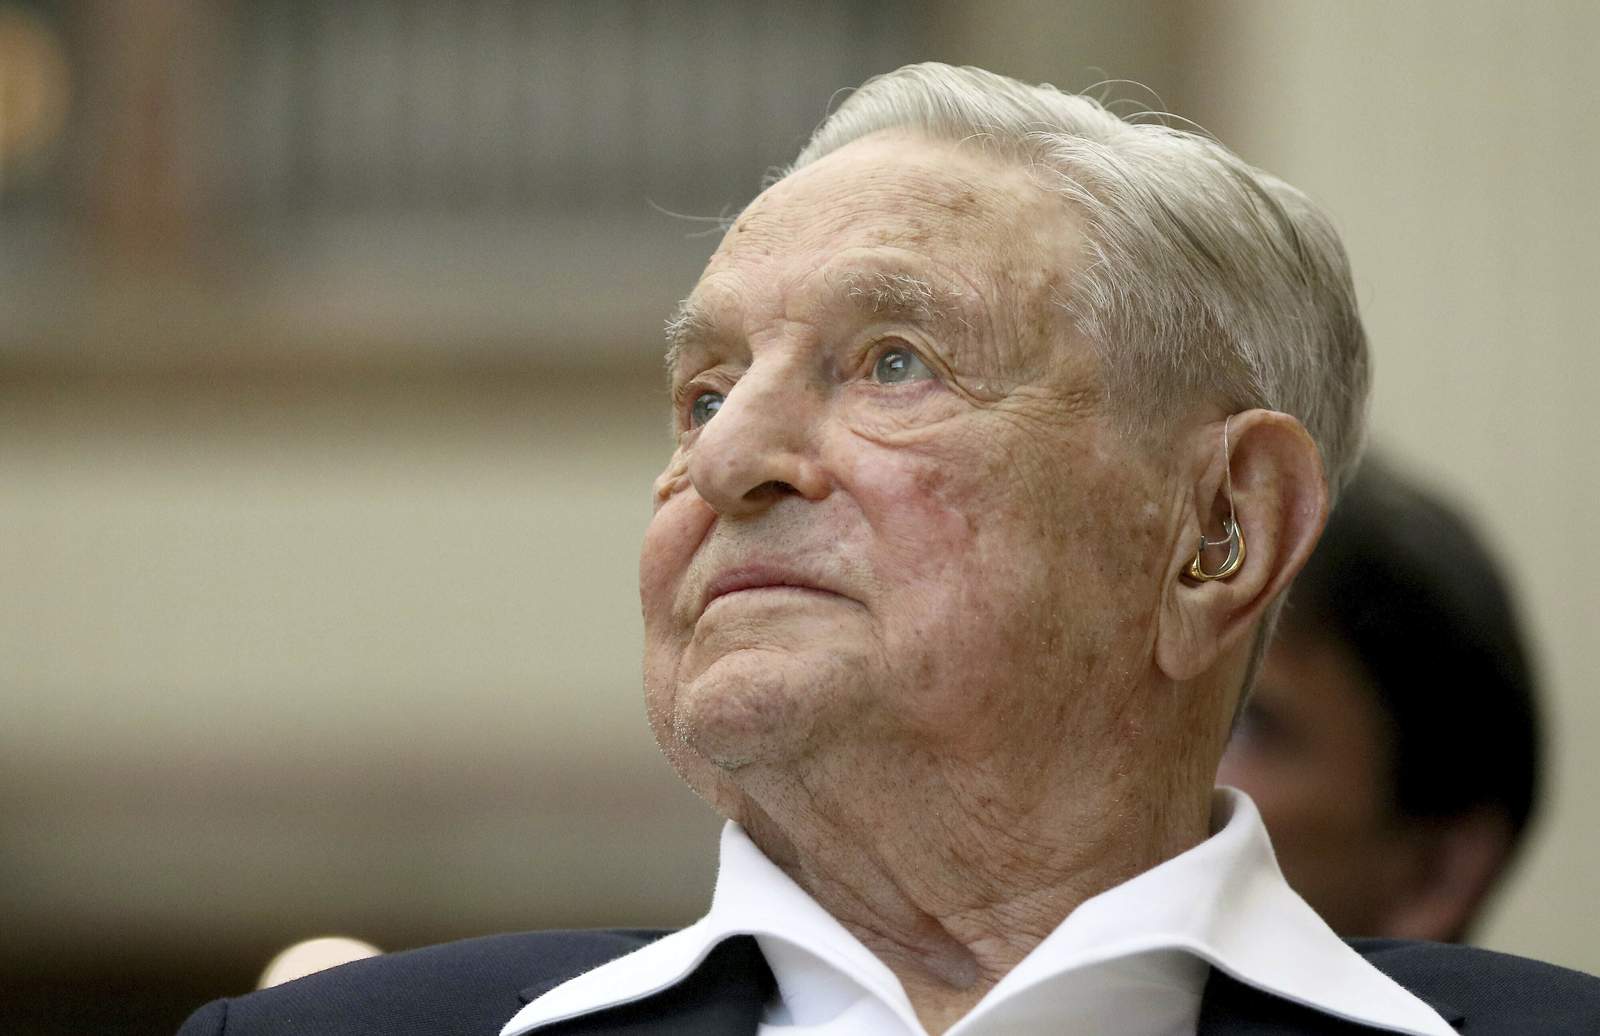 Hungarian official retracts comparing George Soros to Hitler